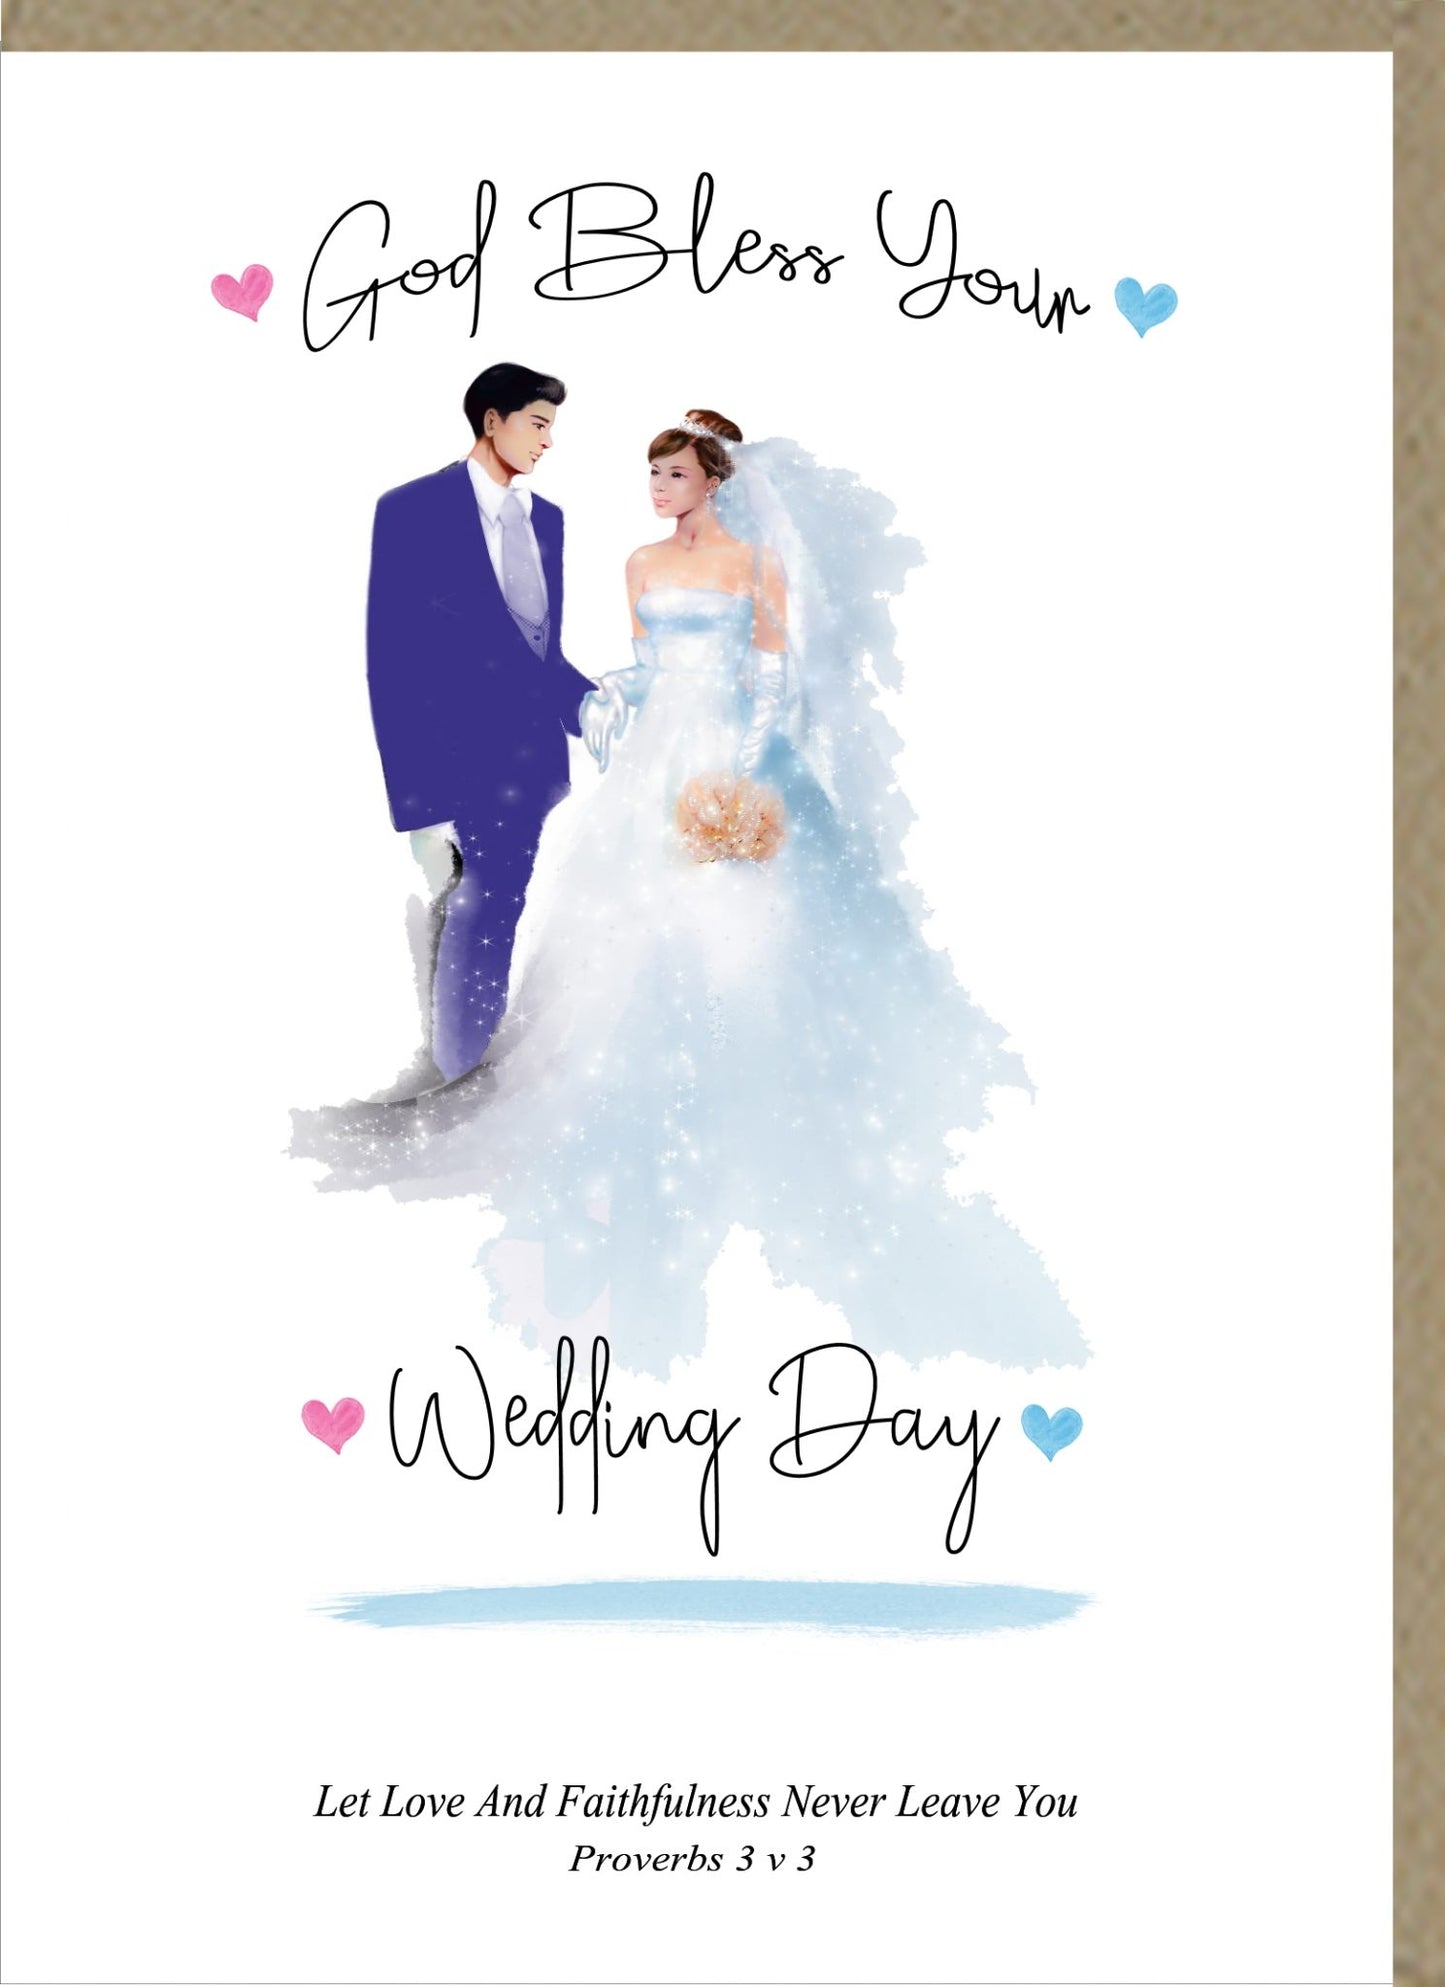 God Bless Your Wedding Day Greetings Card - The Christian Gift Company